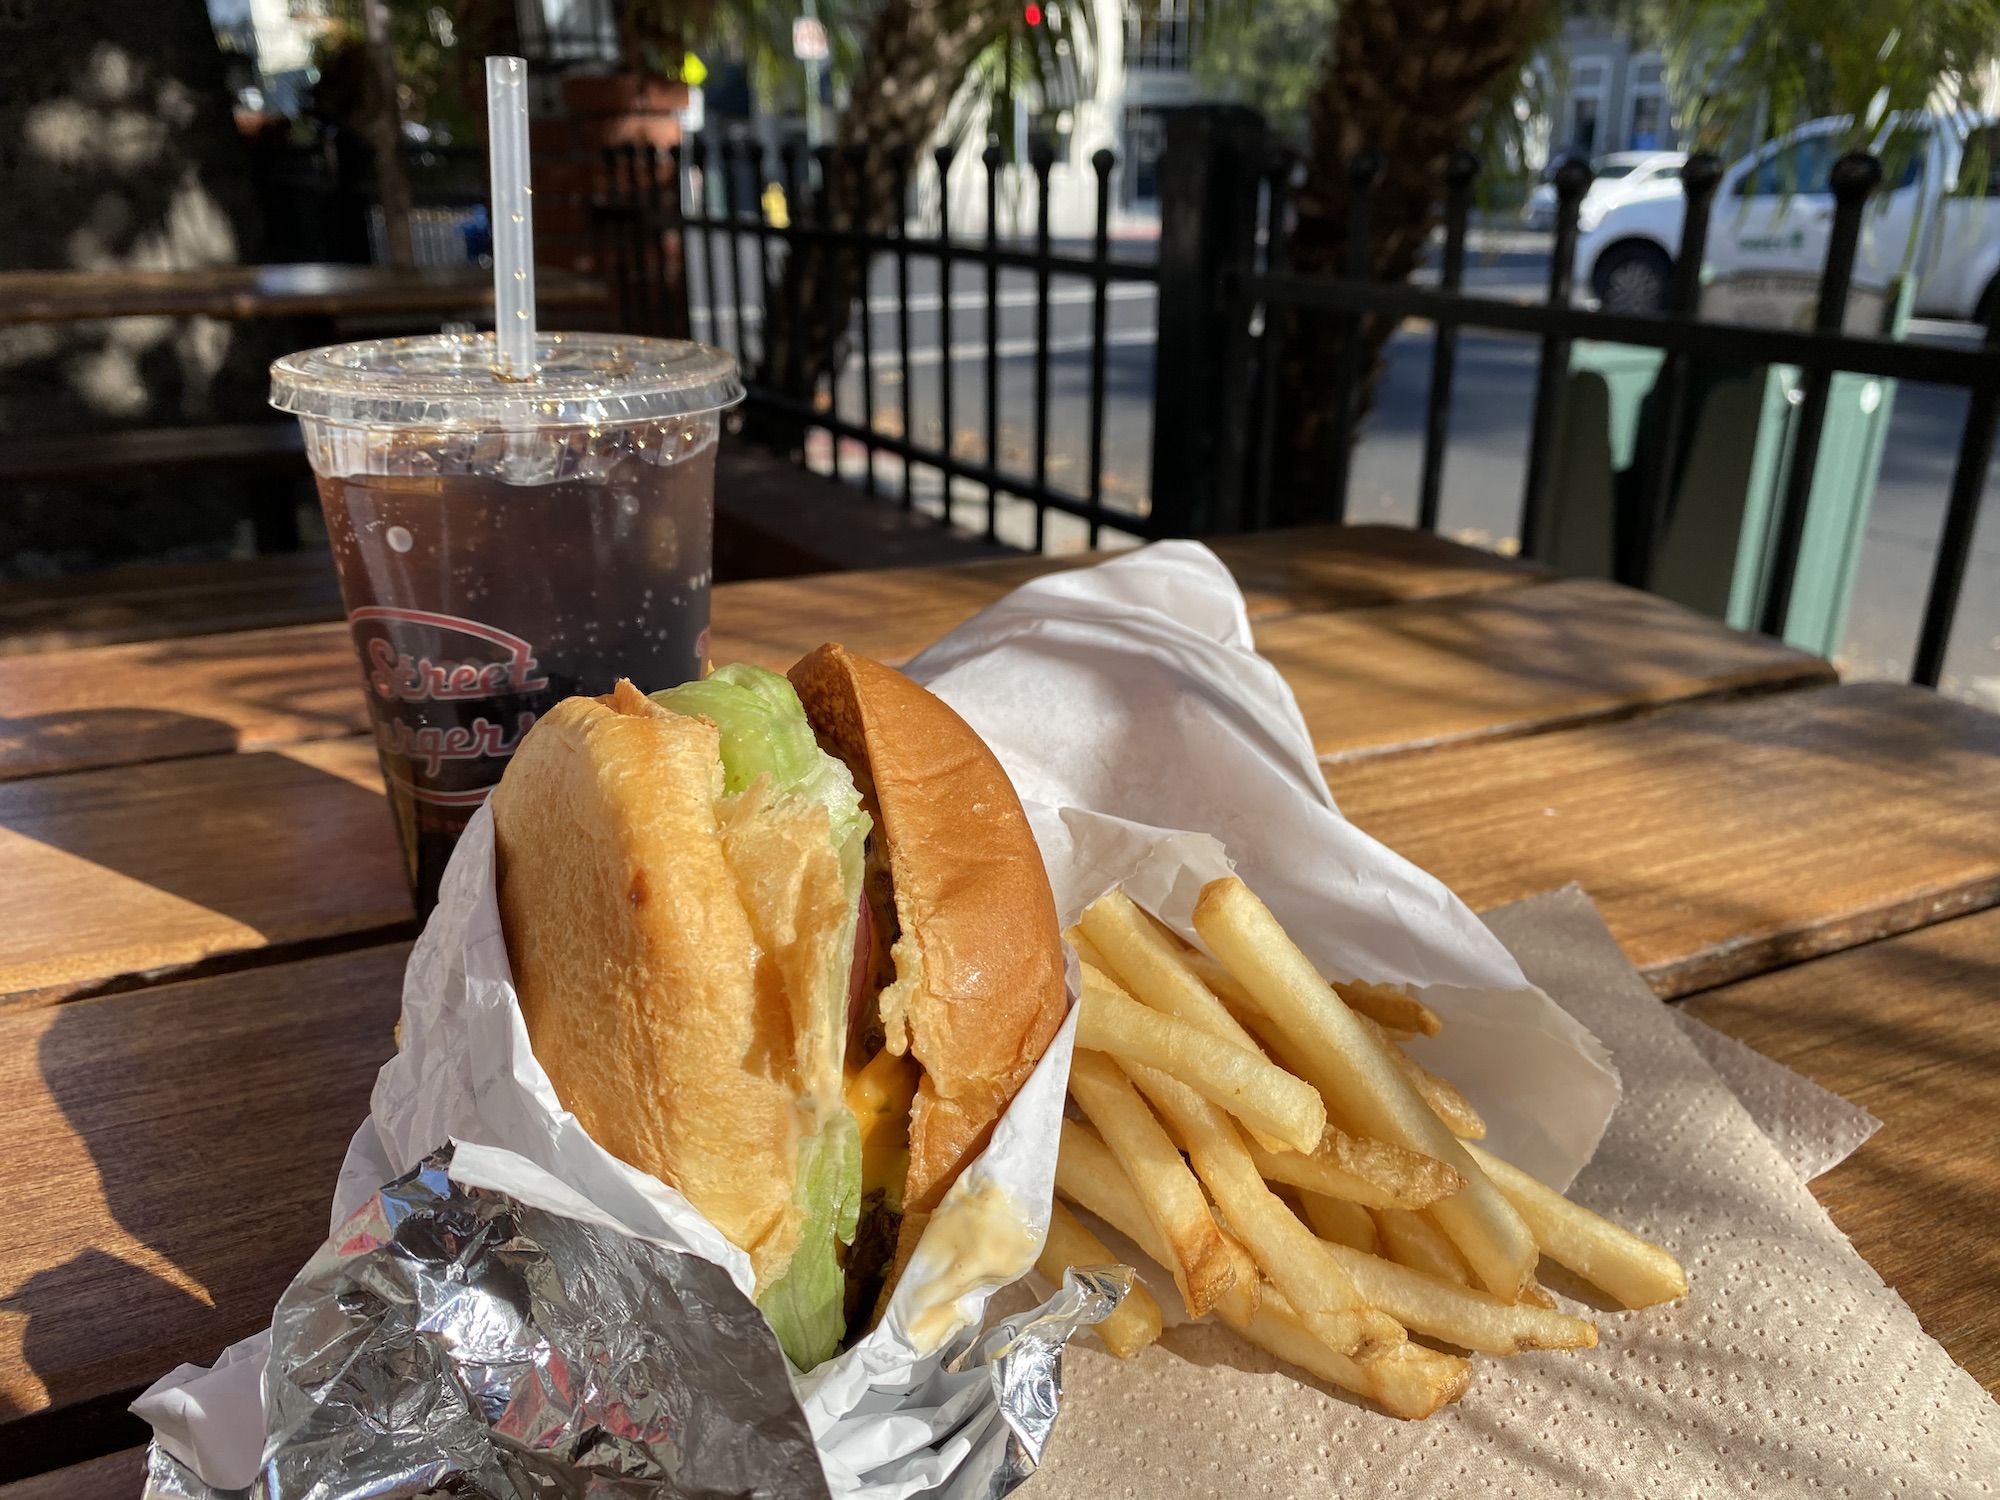 A double cheeseburger, fries, and drink on a table outside.